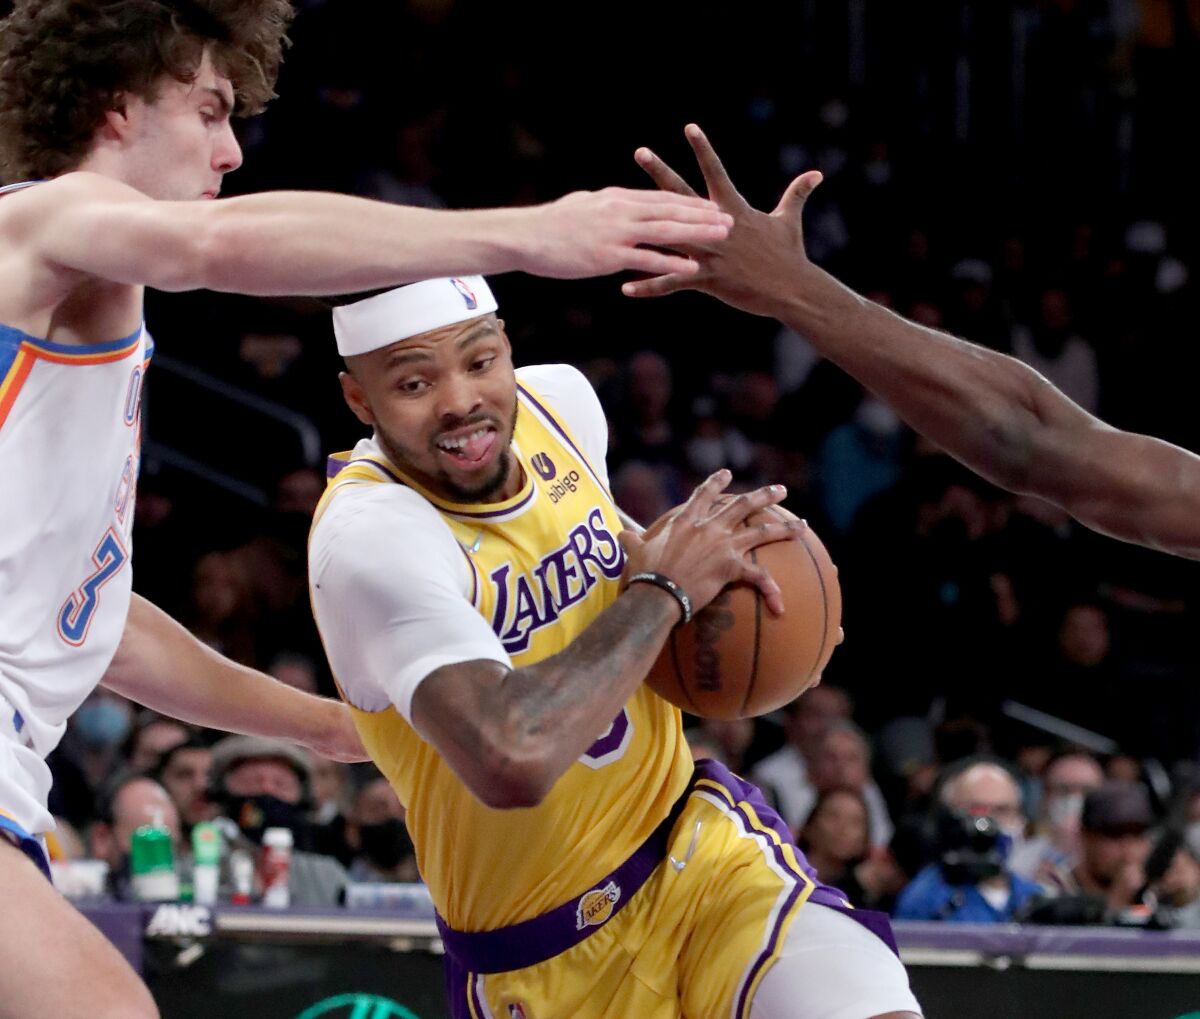 Lakers forward Kent Bazemore works to the basket against the Thunder.